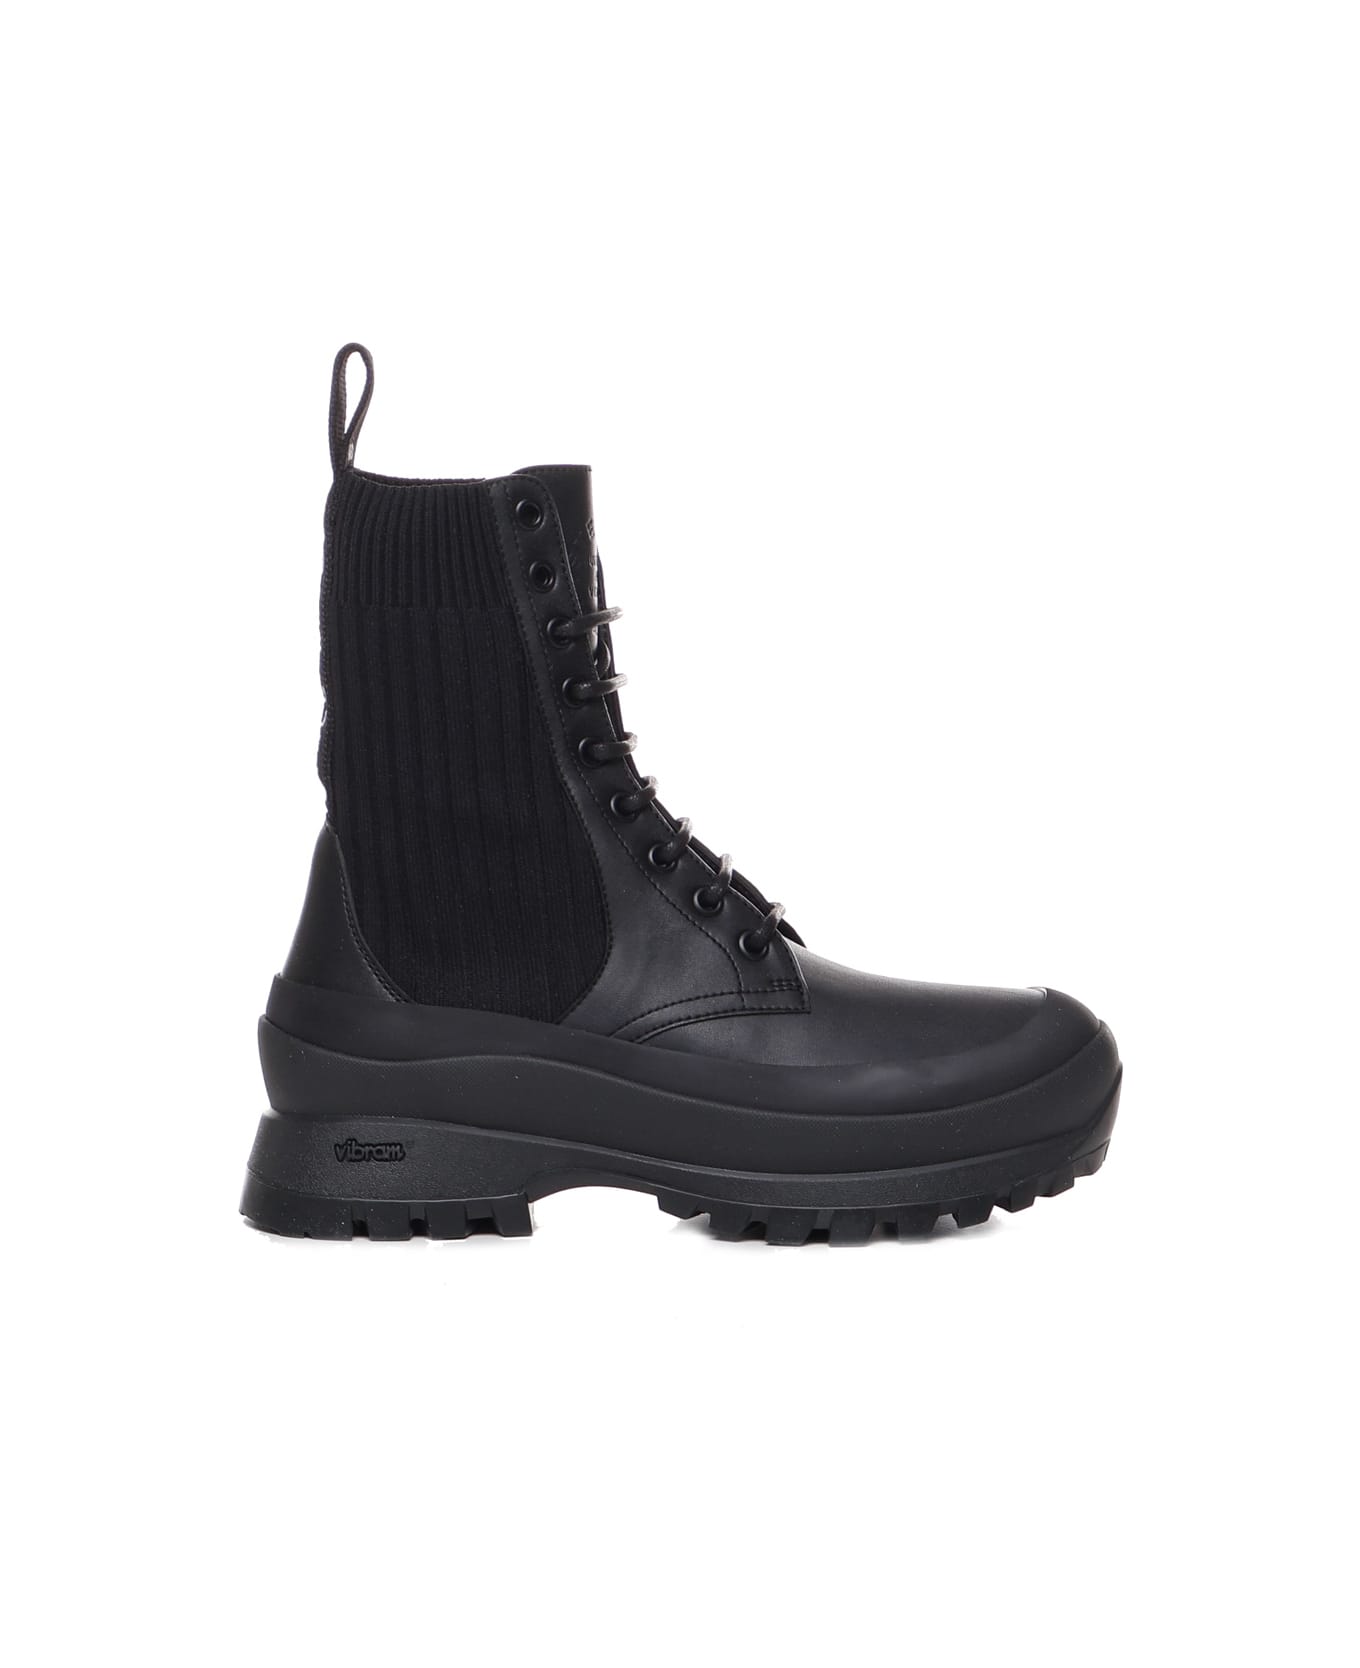 Stella McCartney Biker Boots With Trace Laces - Black